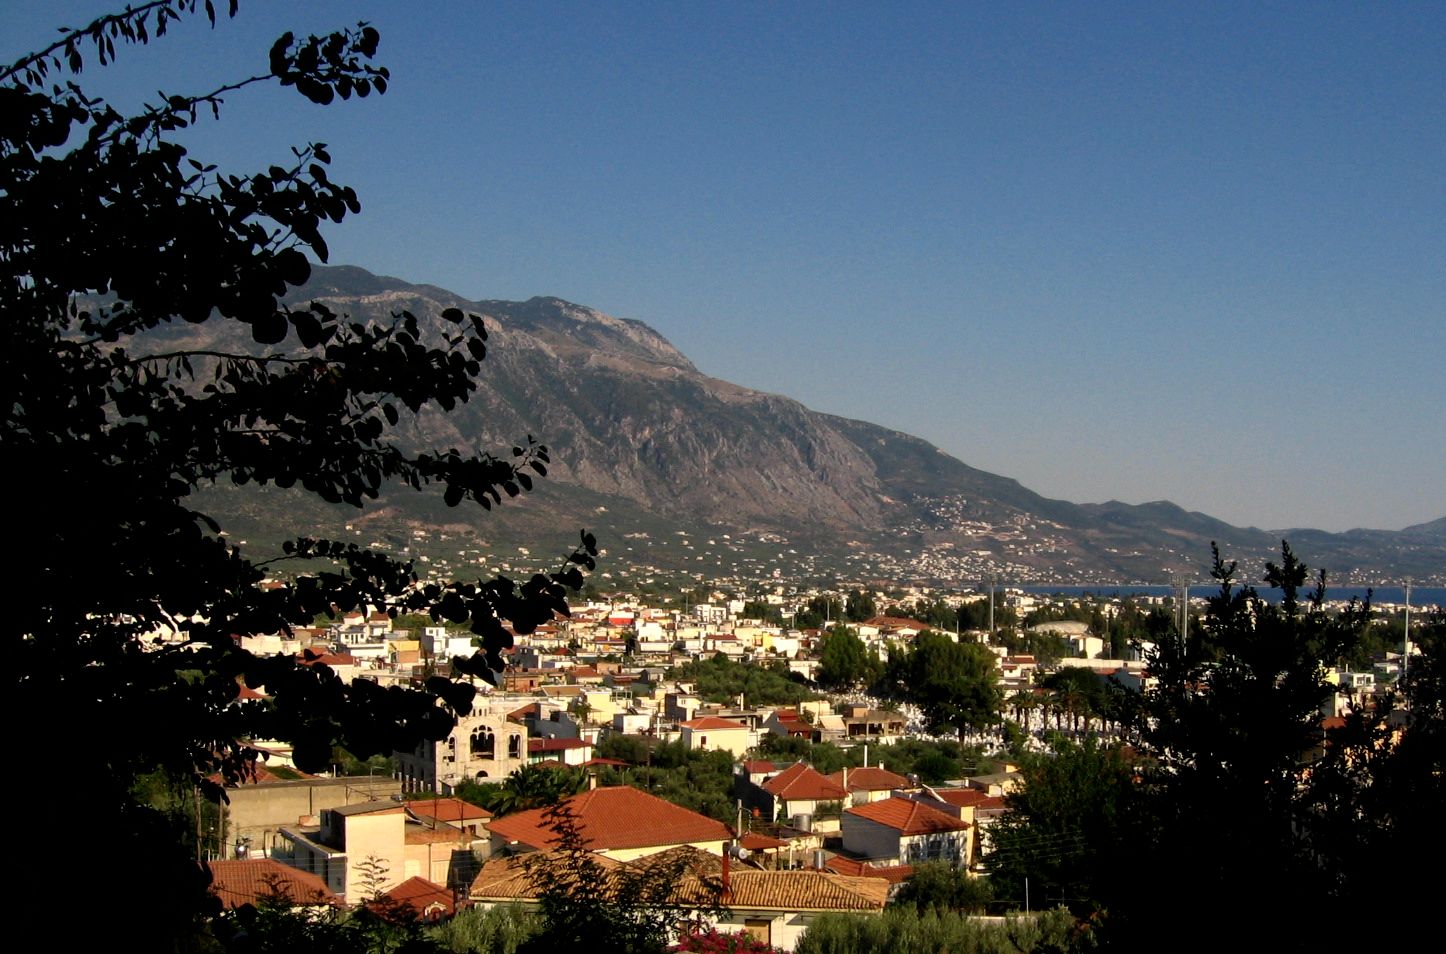 The town of Kalamata is situated at the apex of Messinian Bay, and at the foothill of the Mount Taygetos, between the Mani and Messini peninsulas - Kalamata Greece 